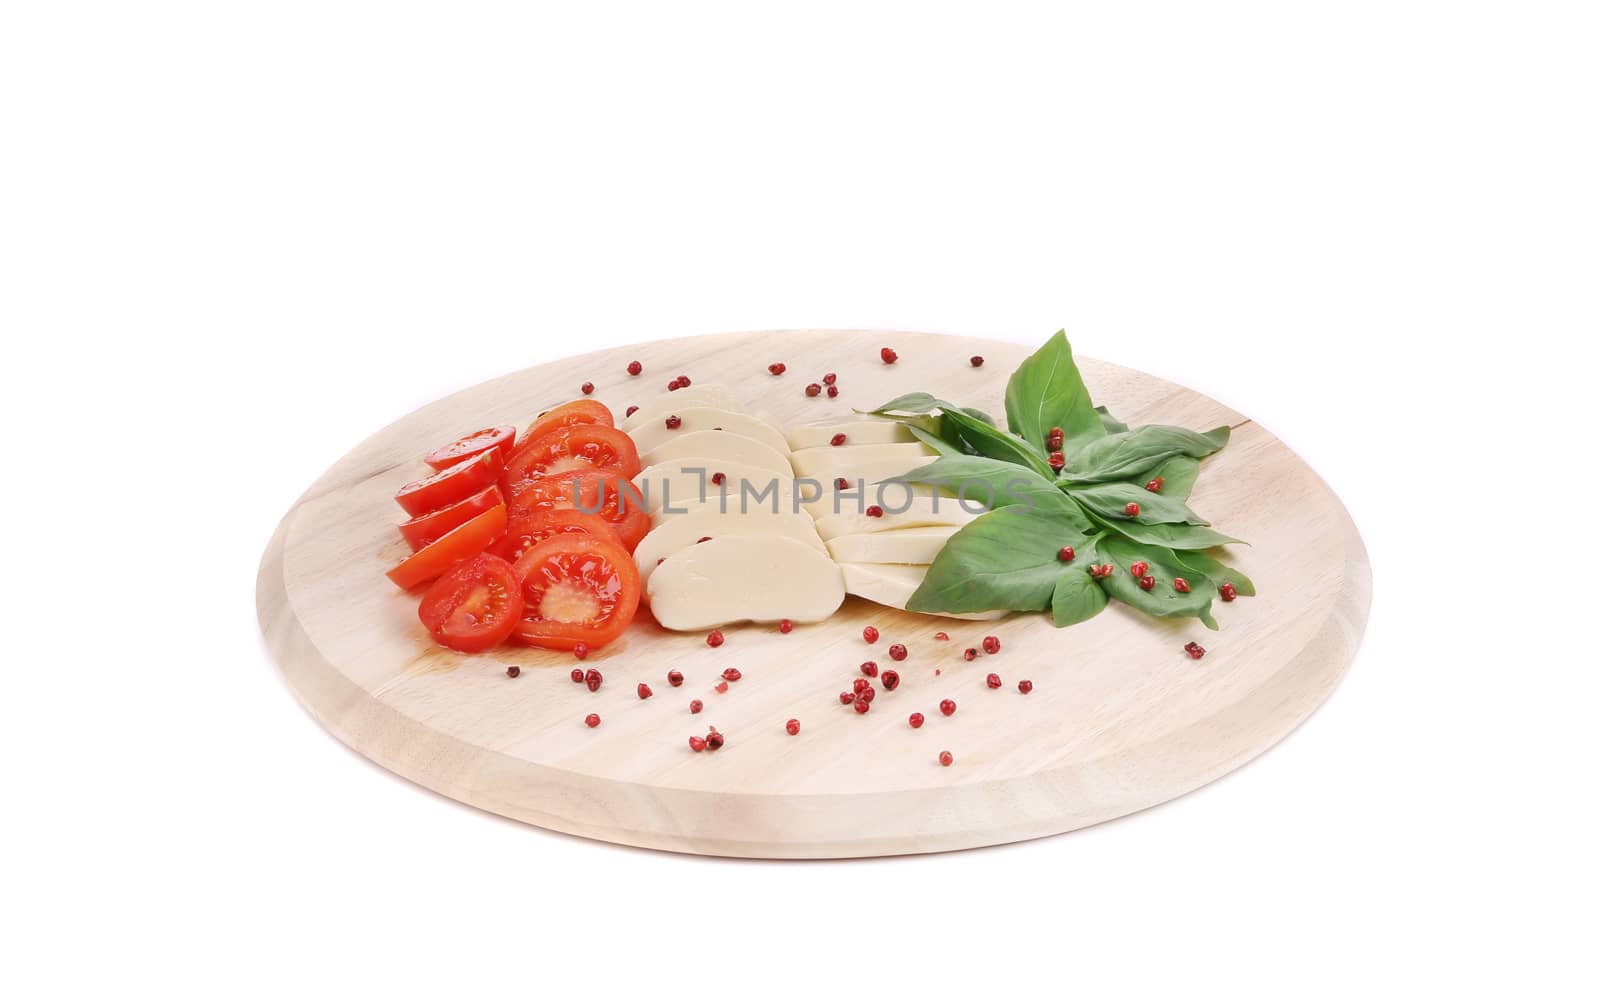 Caprese salad with pepper on platter. Isolated on a white background.